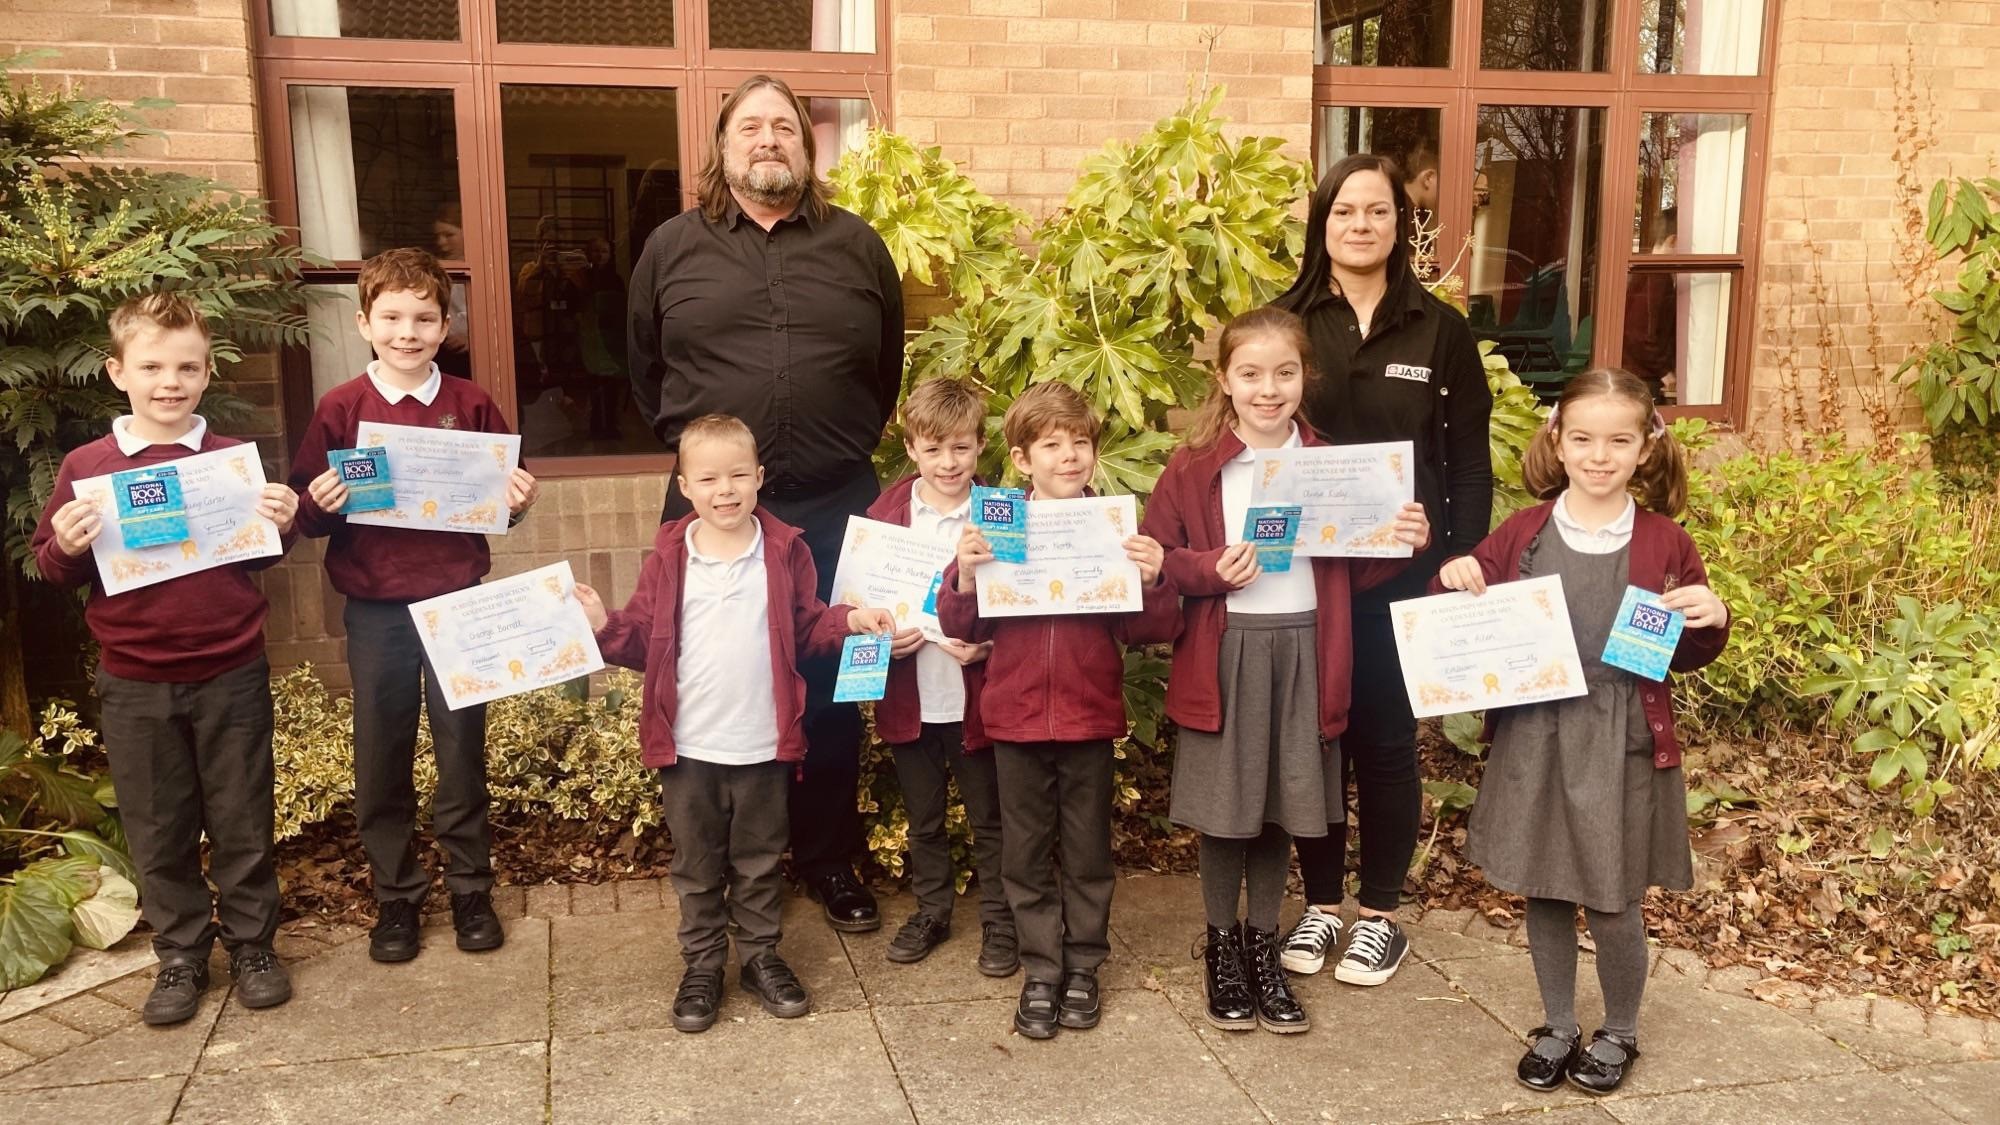 Puriton pupils earn Golden Leaf Awards thanks to us